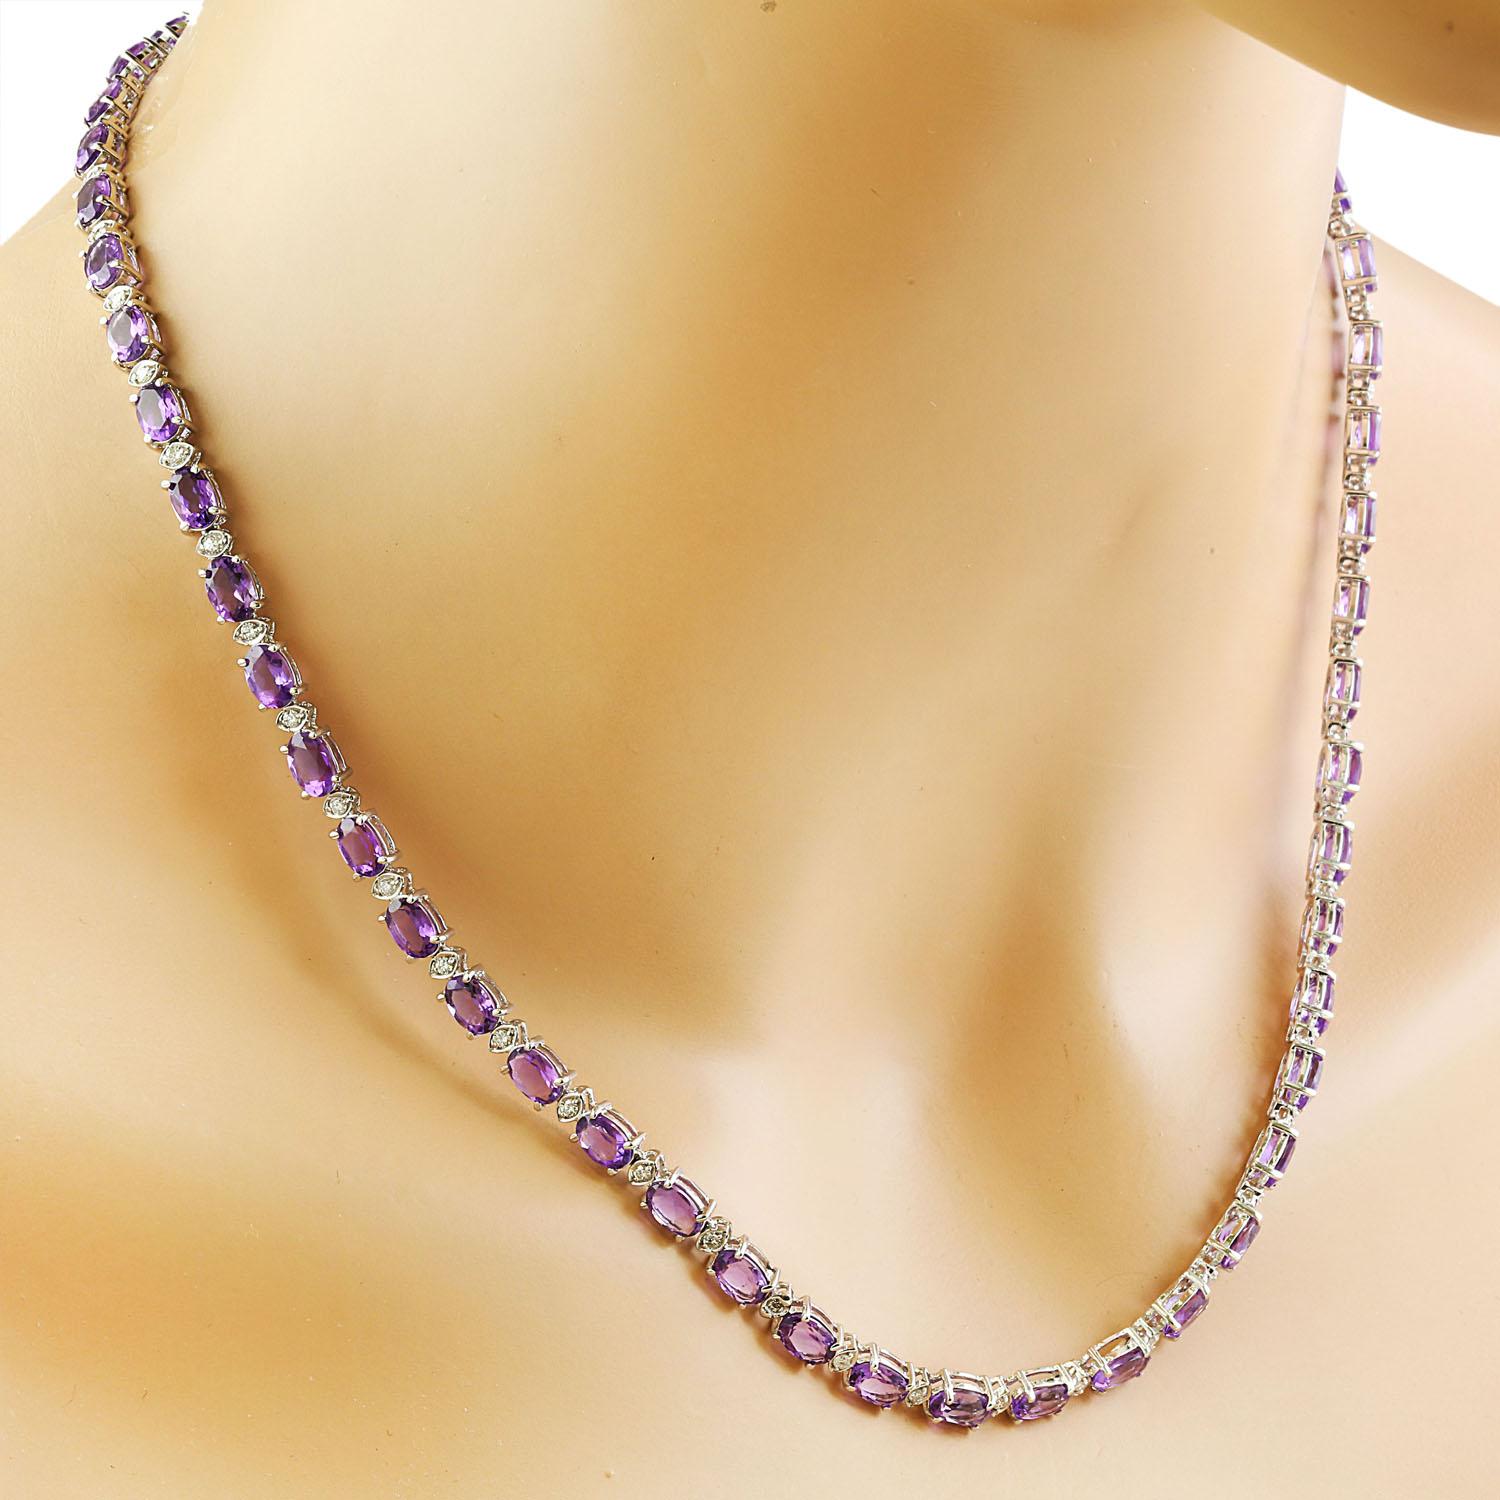 27.50 Carat Natural Amethyst 14 Karat Solid White Gold Diamond Necklace
Stamped: 14K
Total Necklace Weight: 22.4 Grams
Necklace Length: 18 Inches
Amethyst Weight: 26.00 Carat (6.00x4.00 Millimeters) 
Diamond Weight: 1.50 Carat (F-G Color, VS2-SI1